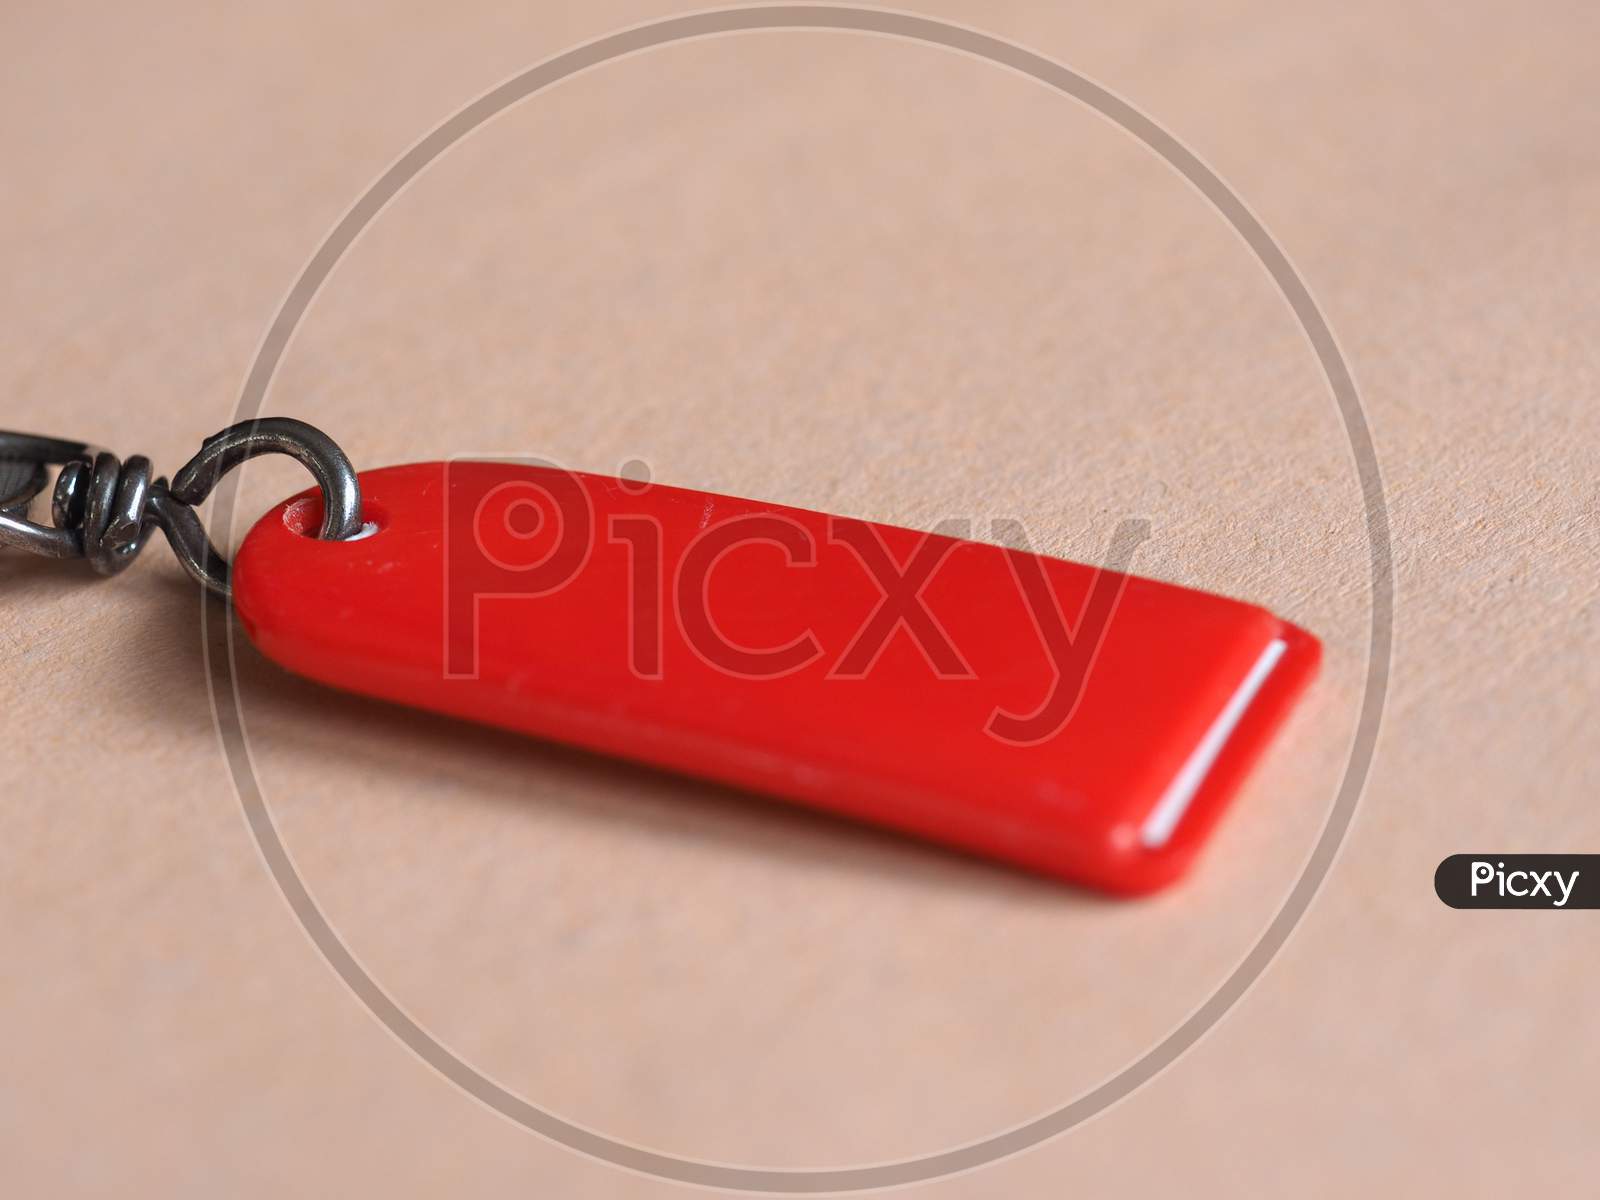 Red Key Ring Selective Focus